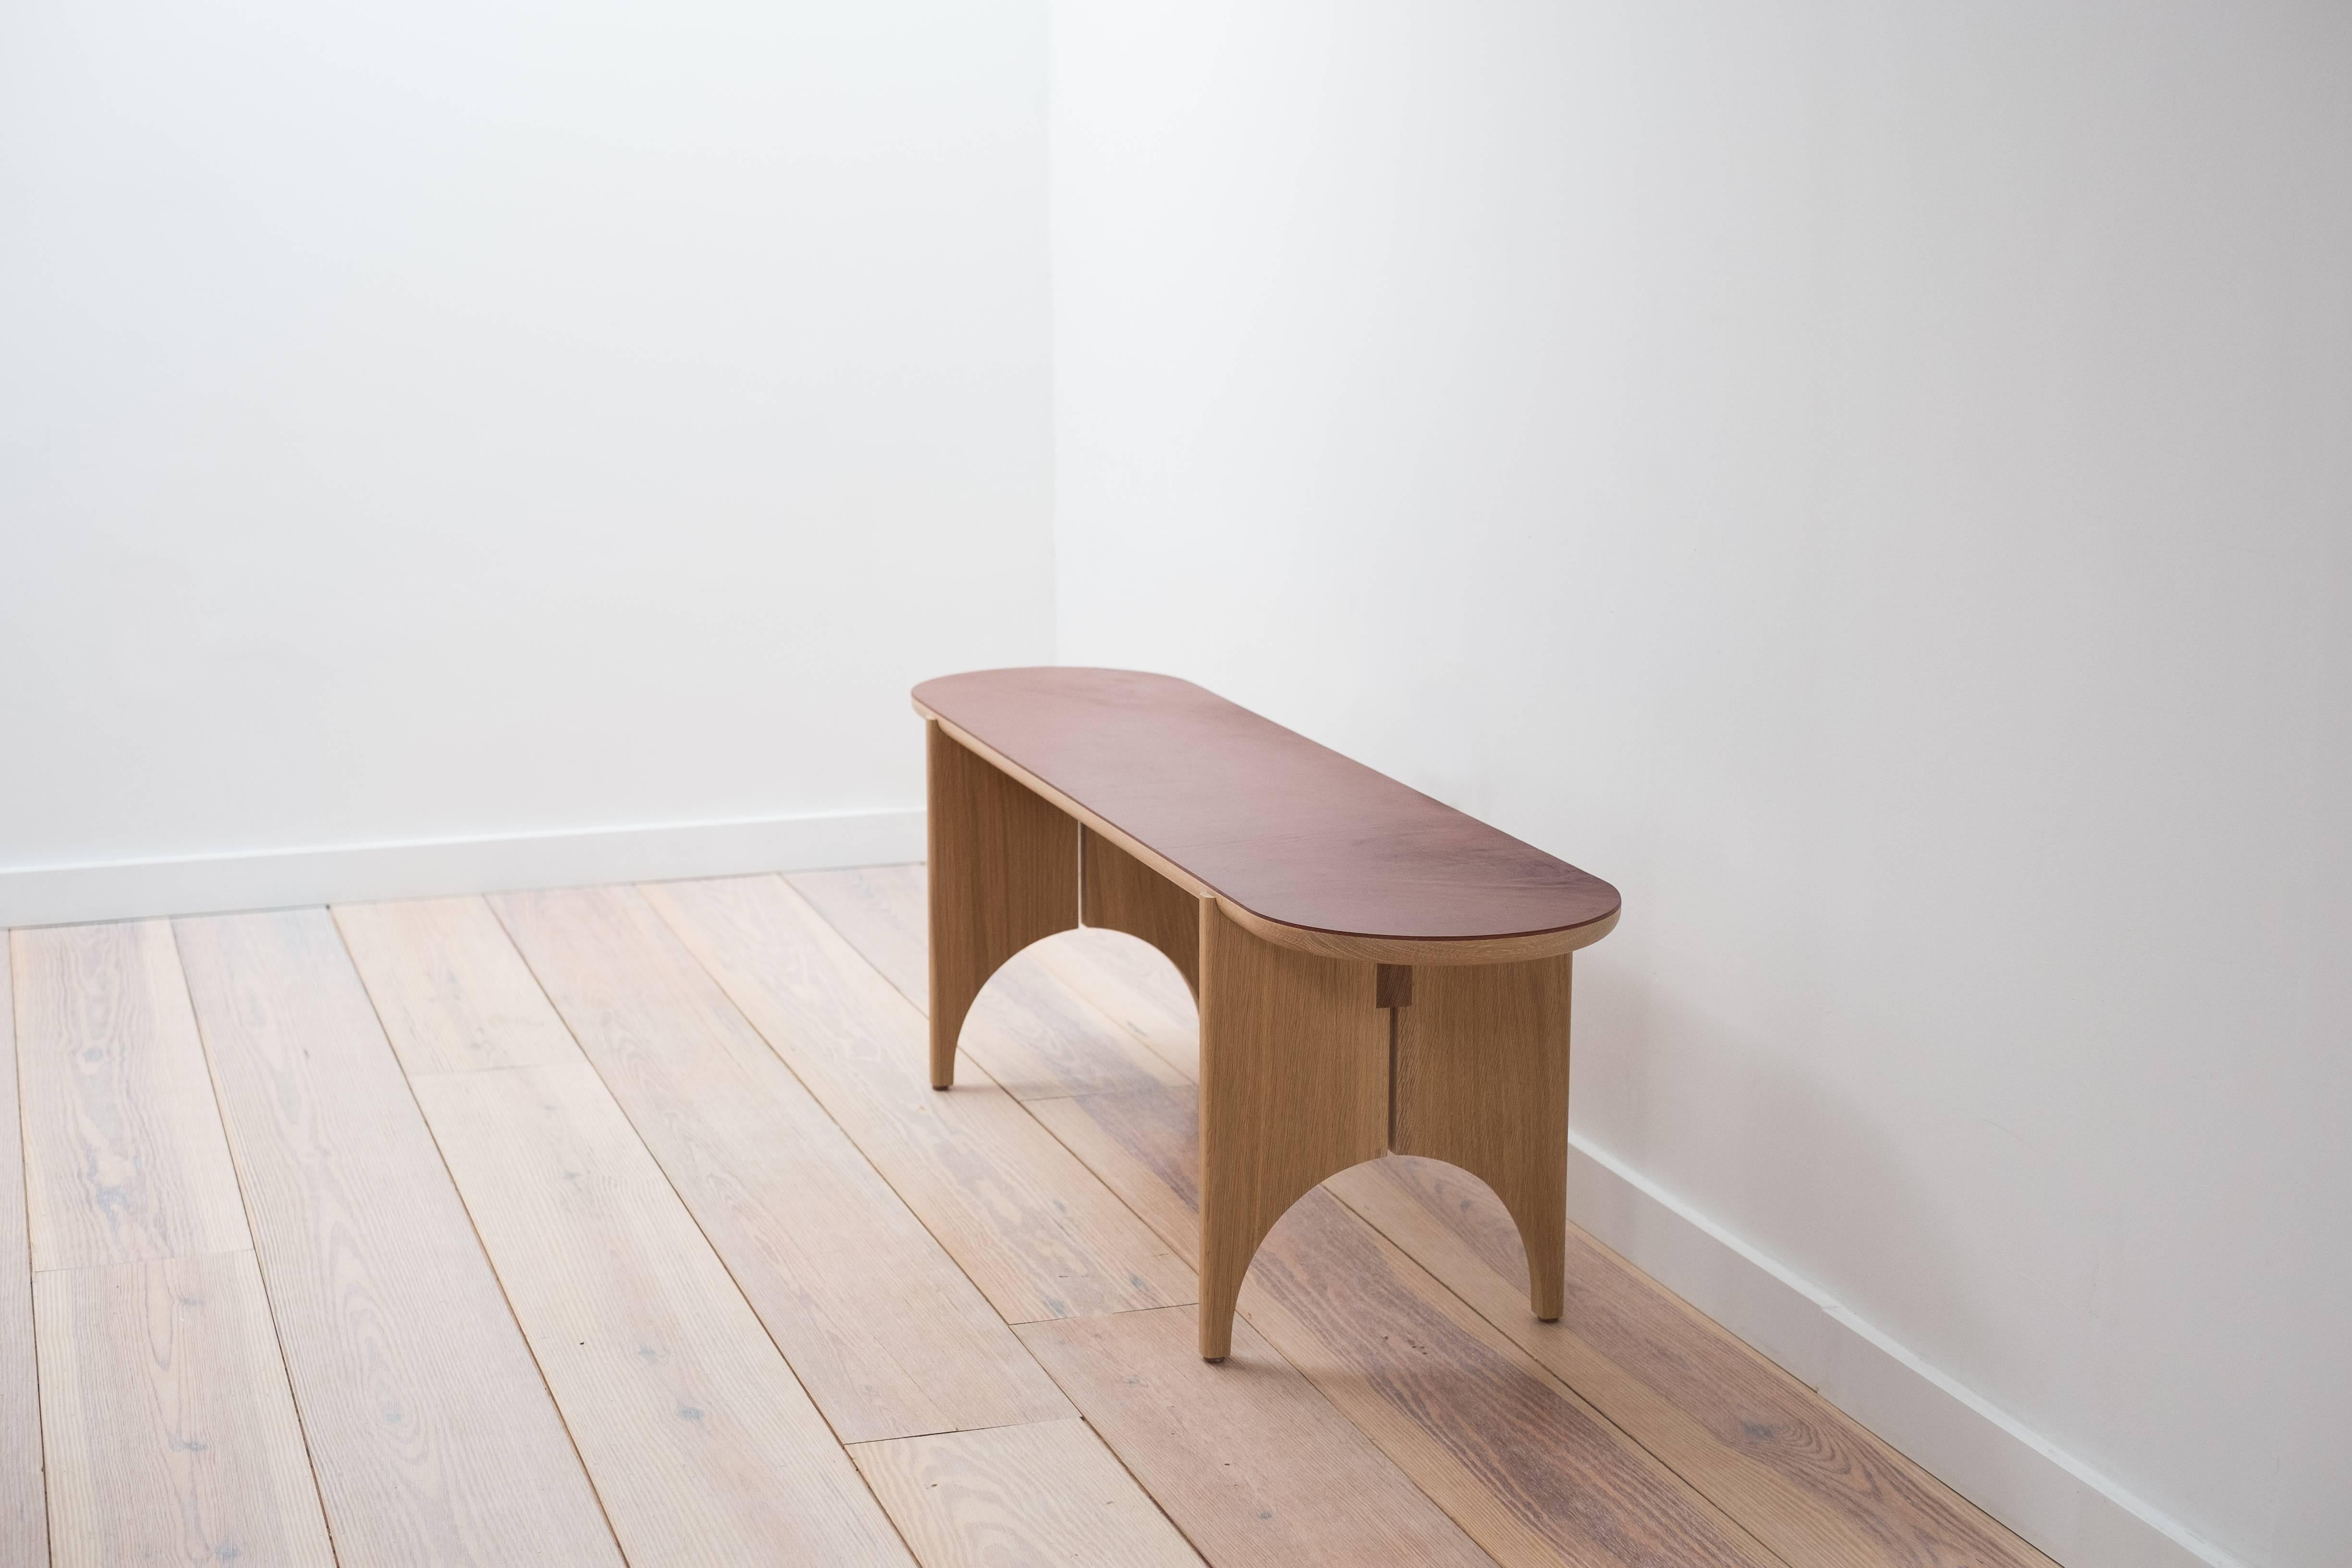 With its distinct reference to Shaker design, the Autumn Bench blends traditional concepts with a contemporary form. Its crescent shaped legs are constructed from hand-selected white oak, and its top is in laminated in hand-finished, full grain